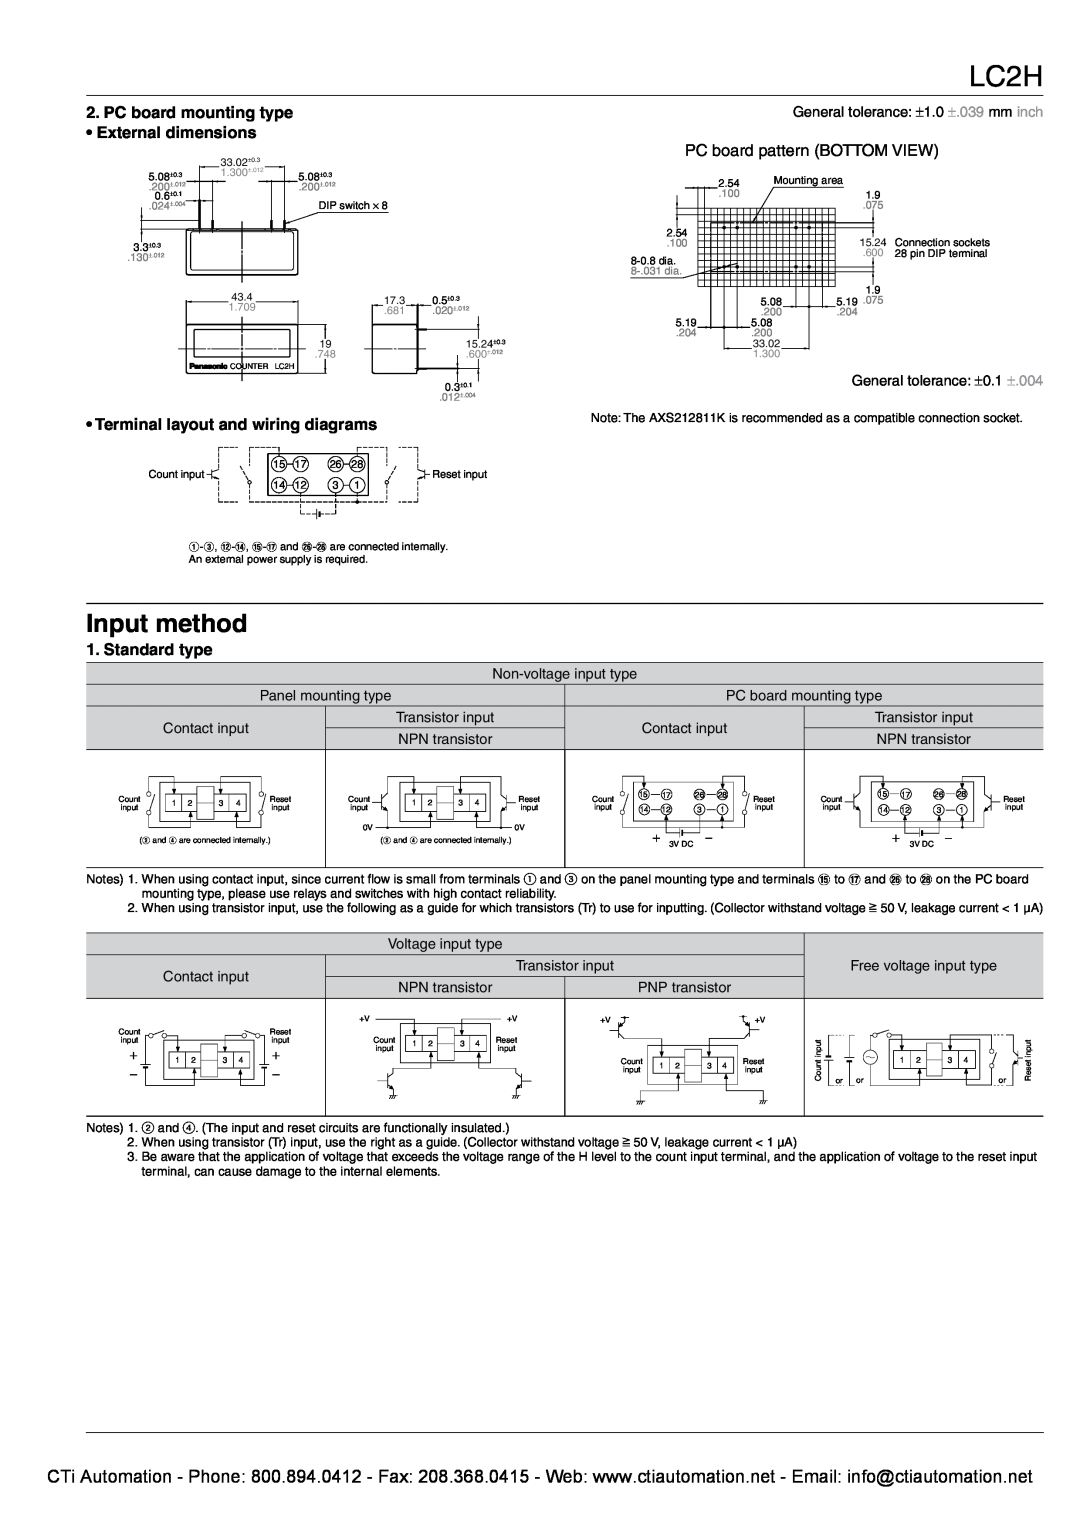 Panasonic LC2H specifications Input method, PC board mounting type External dimensions, Terminal layout and wiring diagrams 